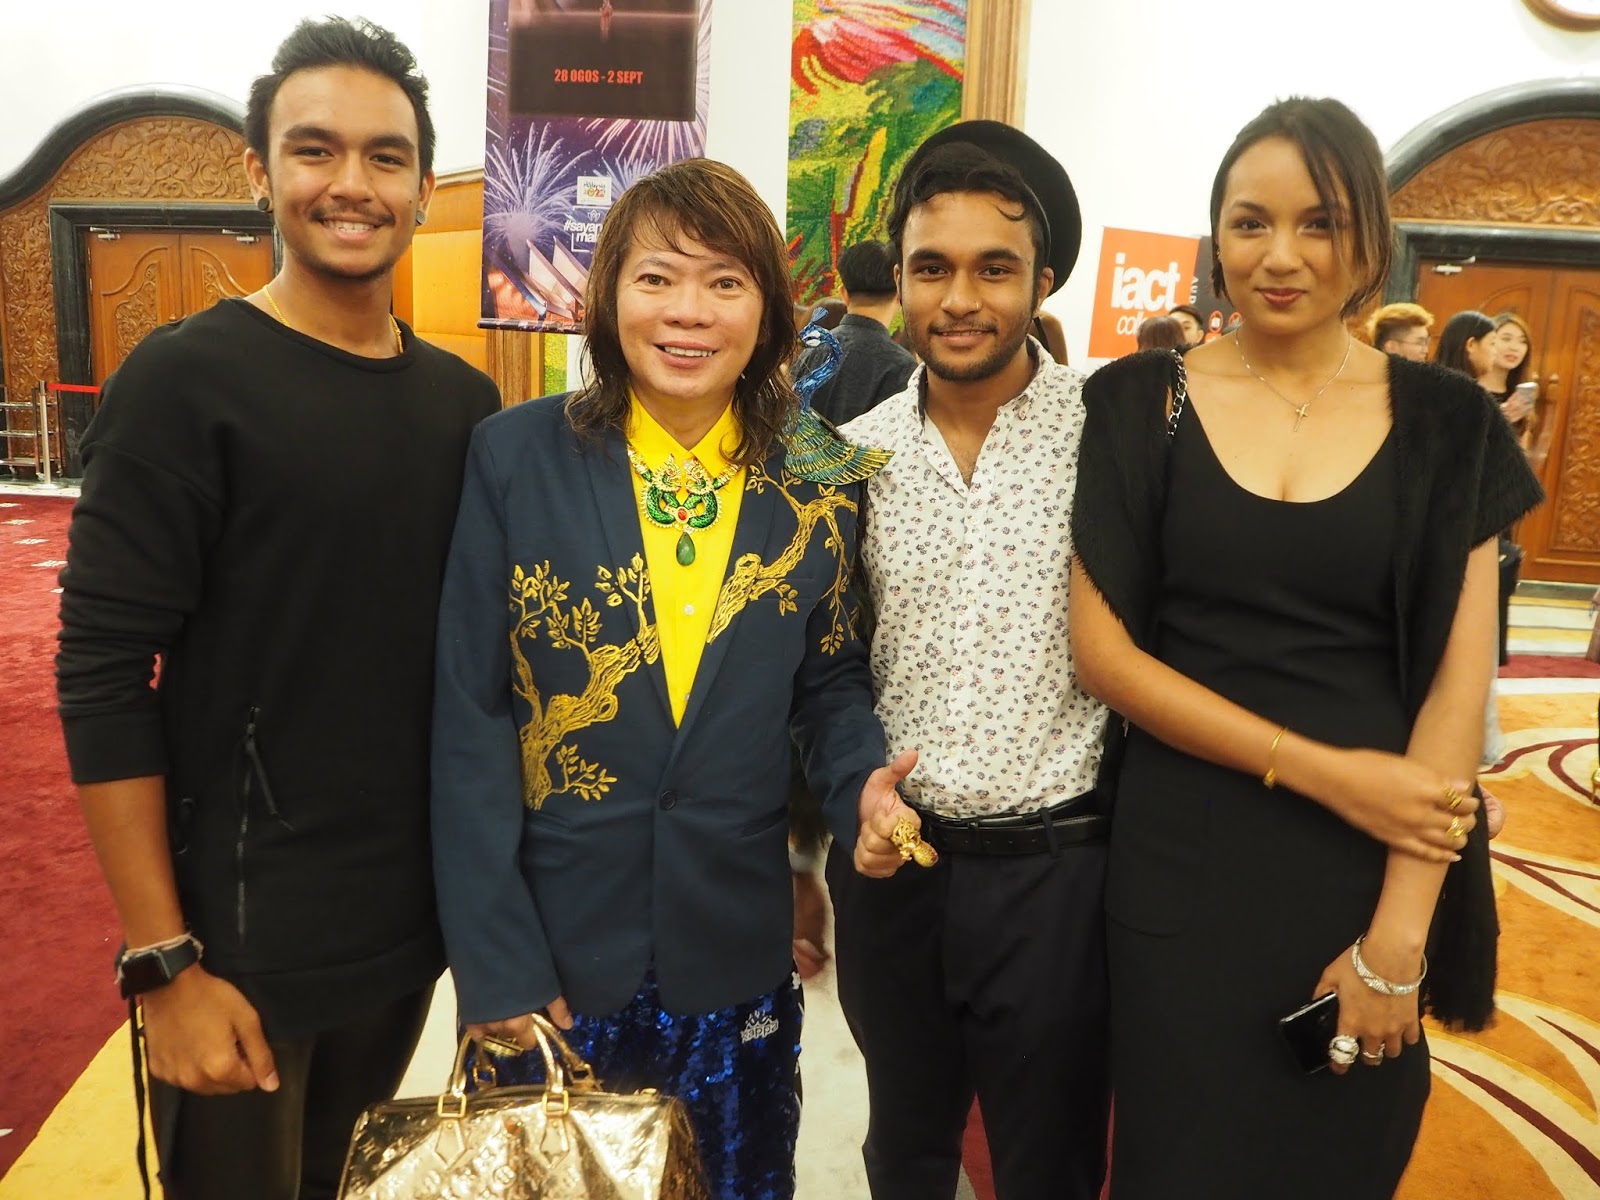 Kee Chee Live!: KUALA LUMPUR ALTA MODA ON 14 MAY 2018 AT ISTANA BUDAYA WAS A COOL CULTURAL SUCCESS AS IT WAS LACED AND GRACED WITH AN FLAVOUR BY ANNA